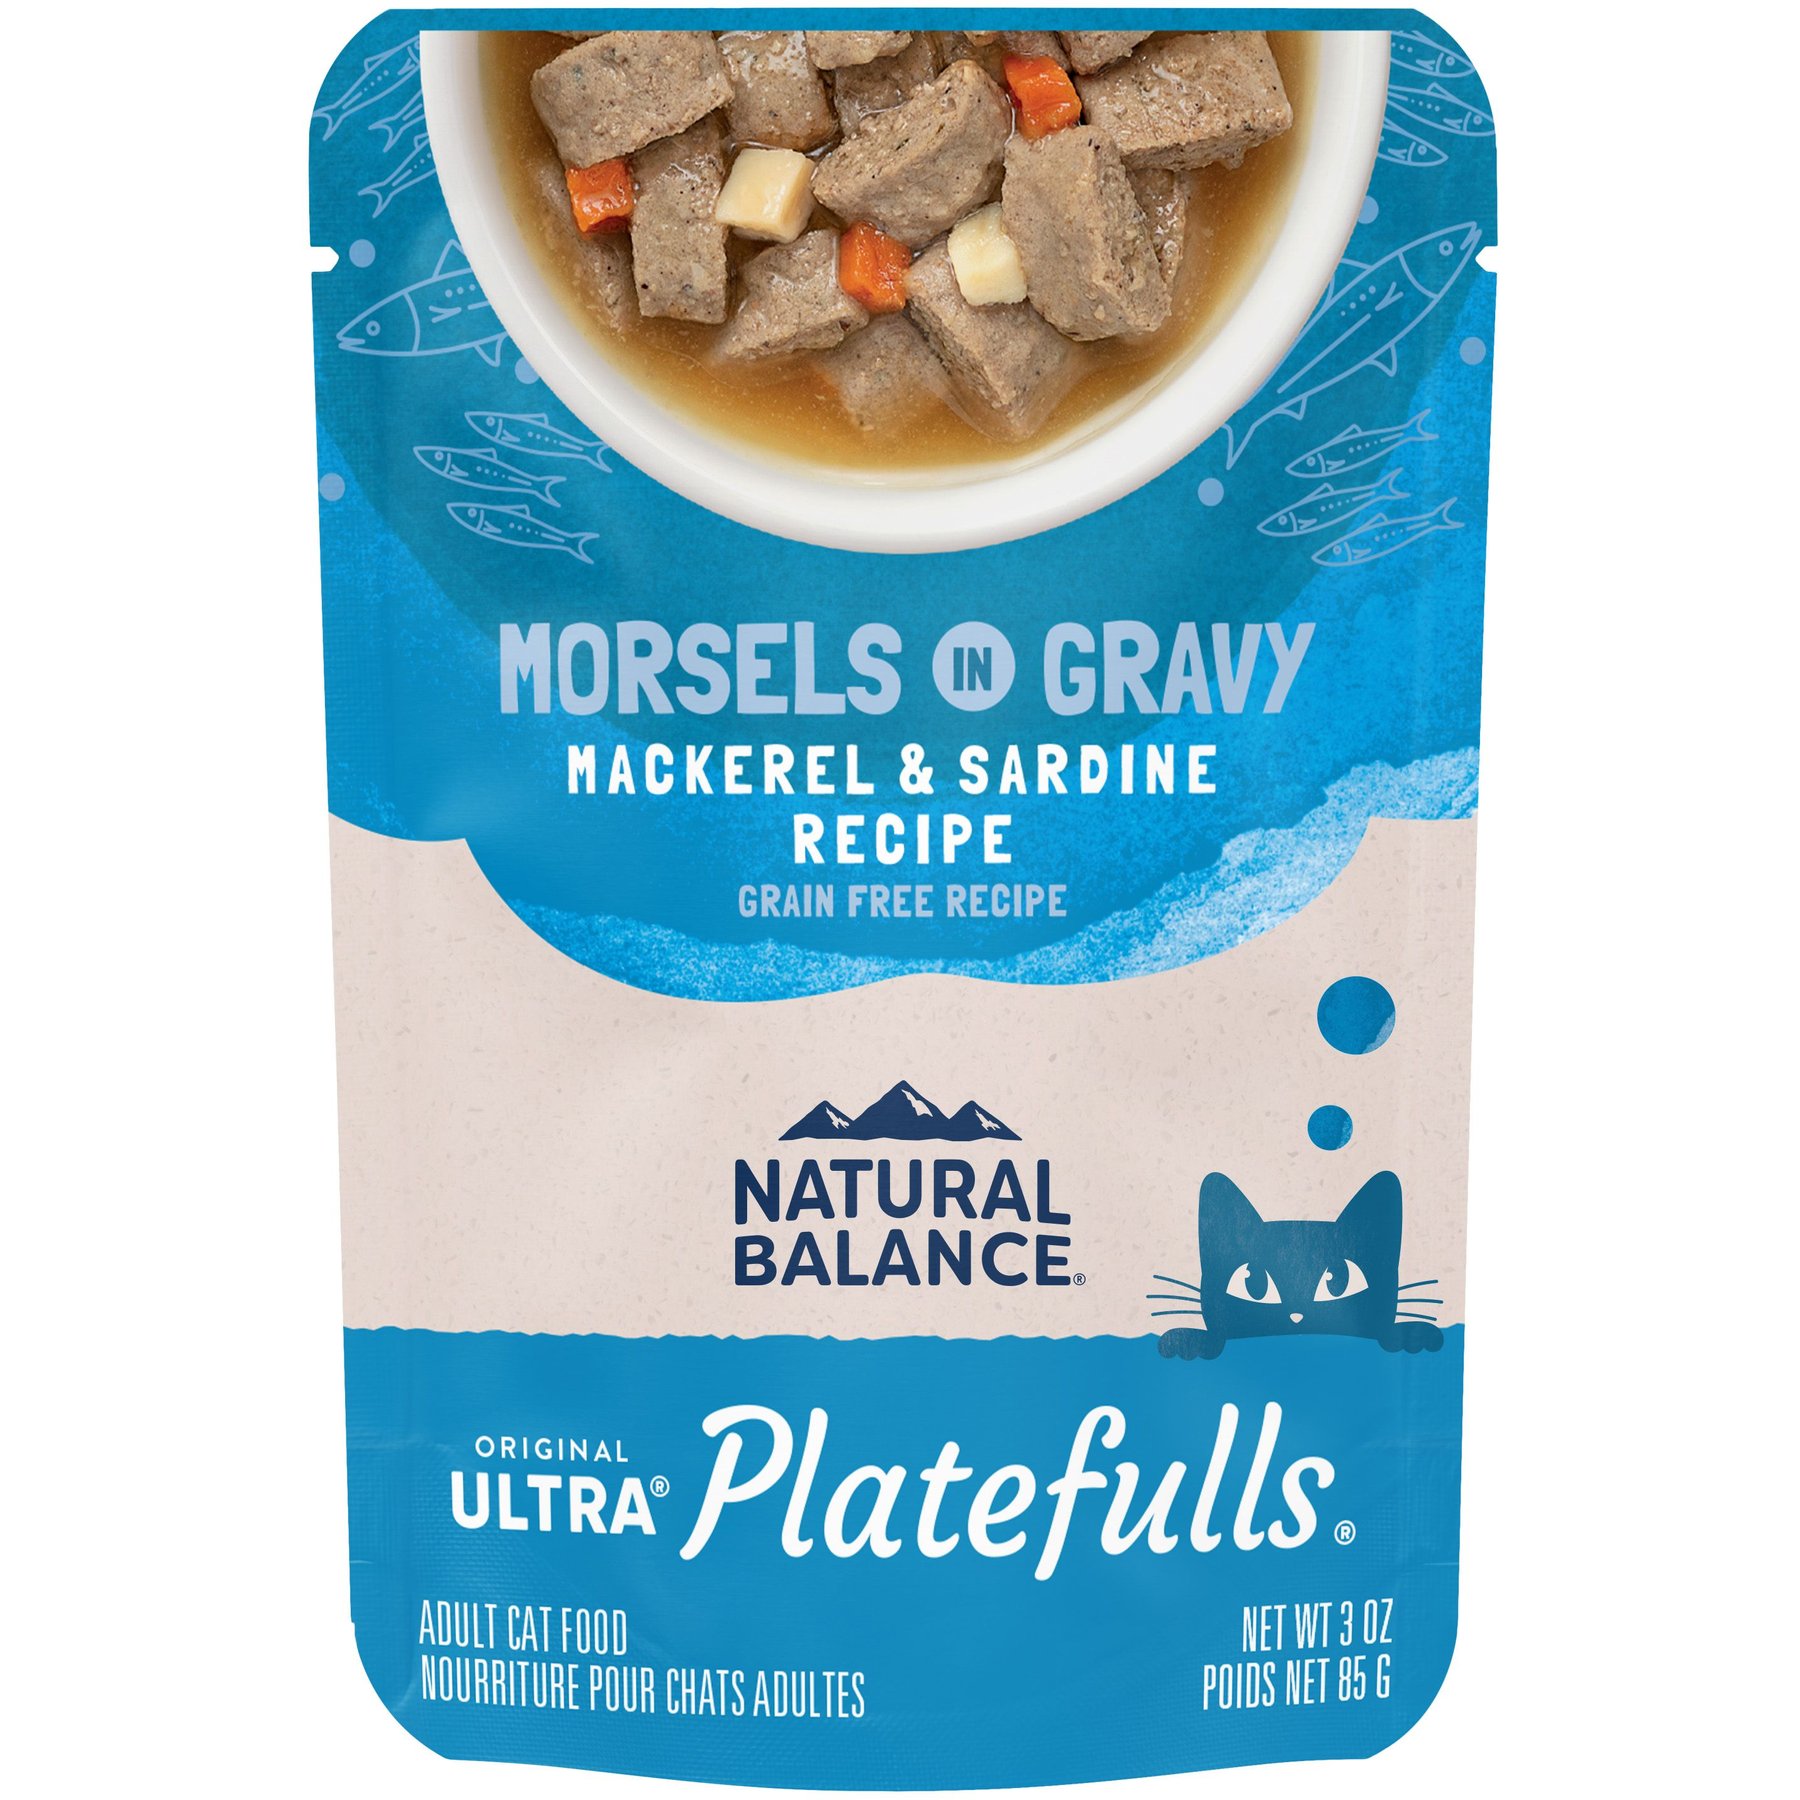 Royal Canin Veterinary Urinary S/O Morsels in Gravy patée chat